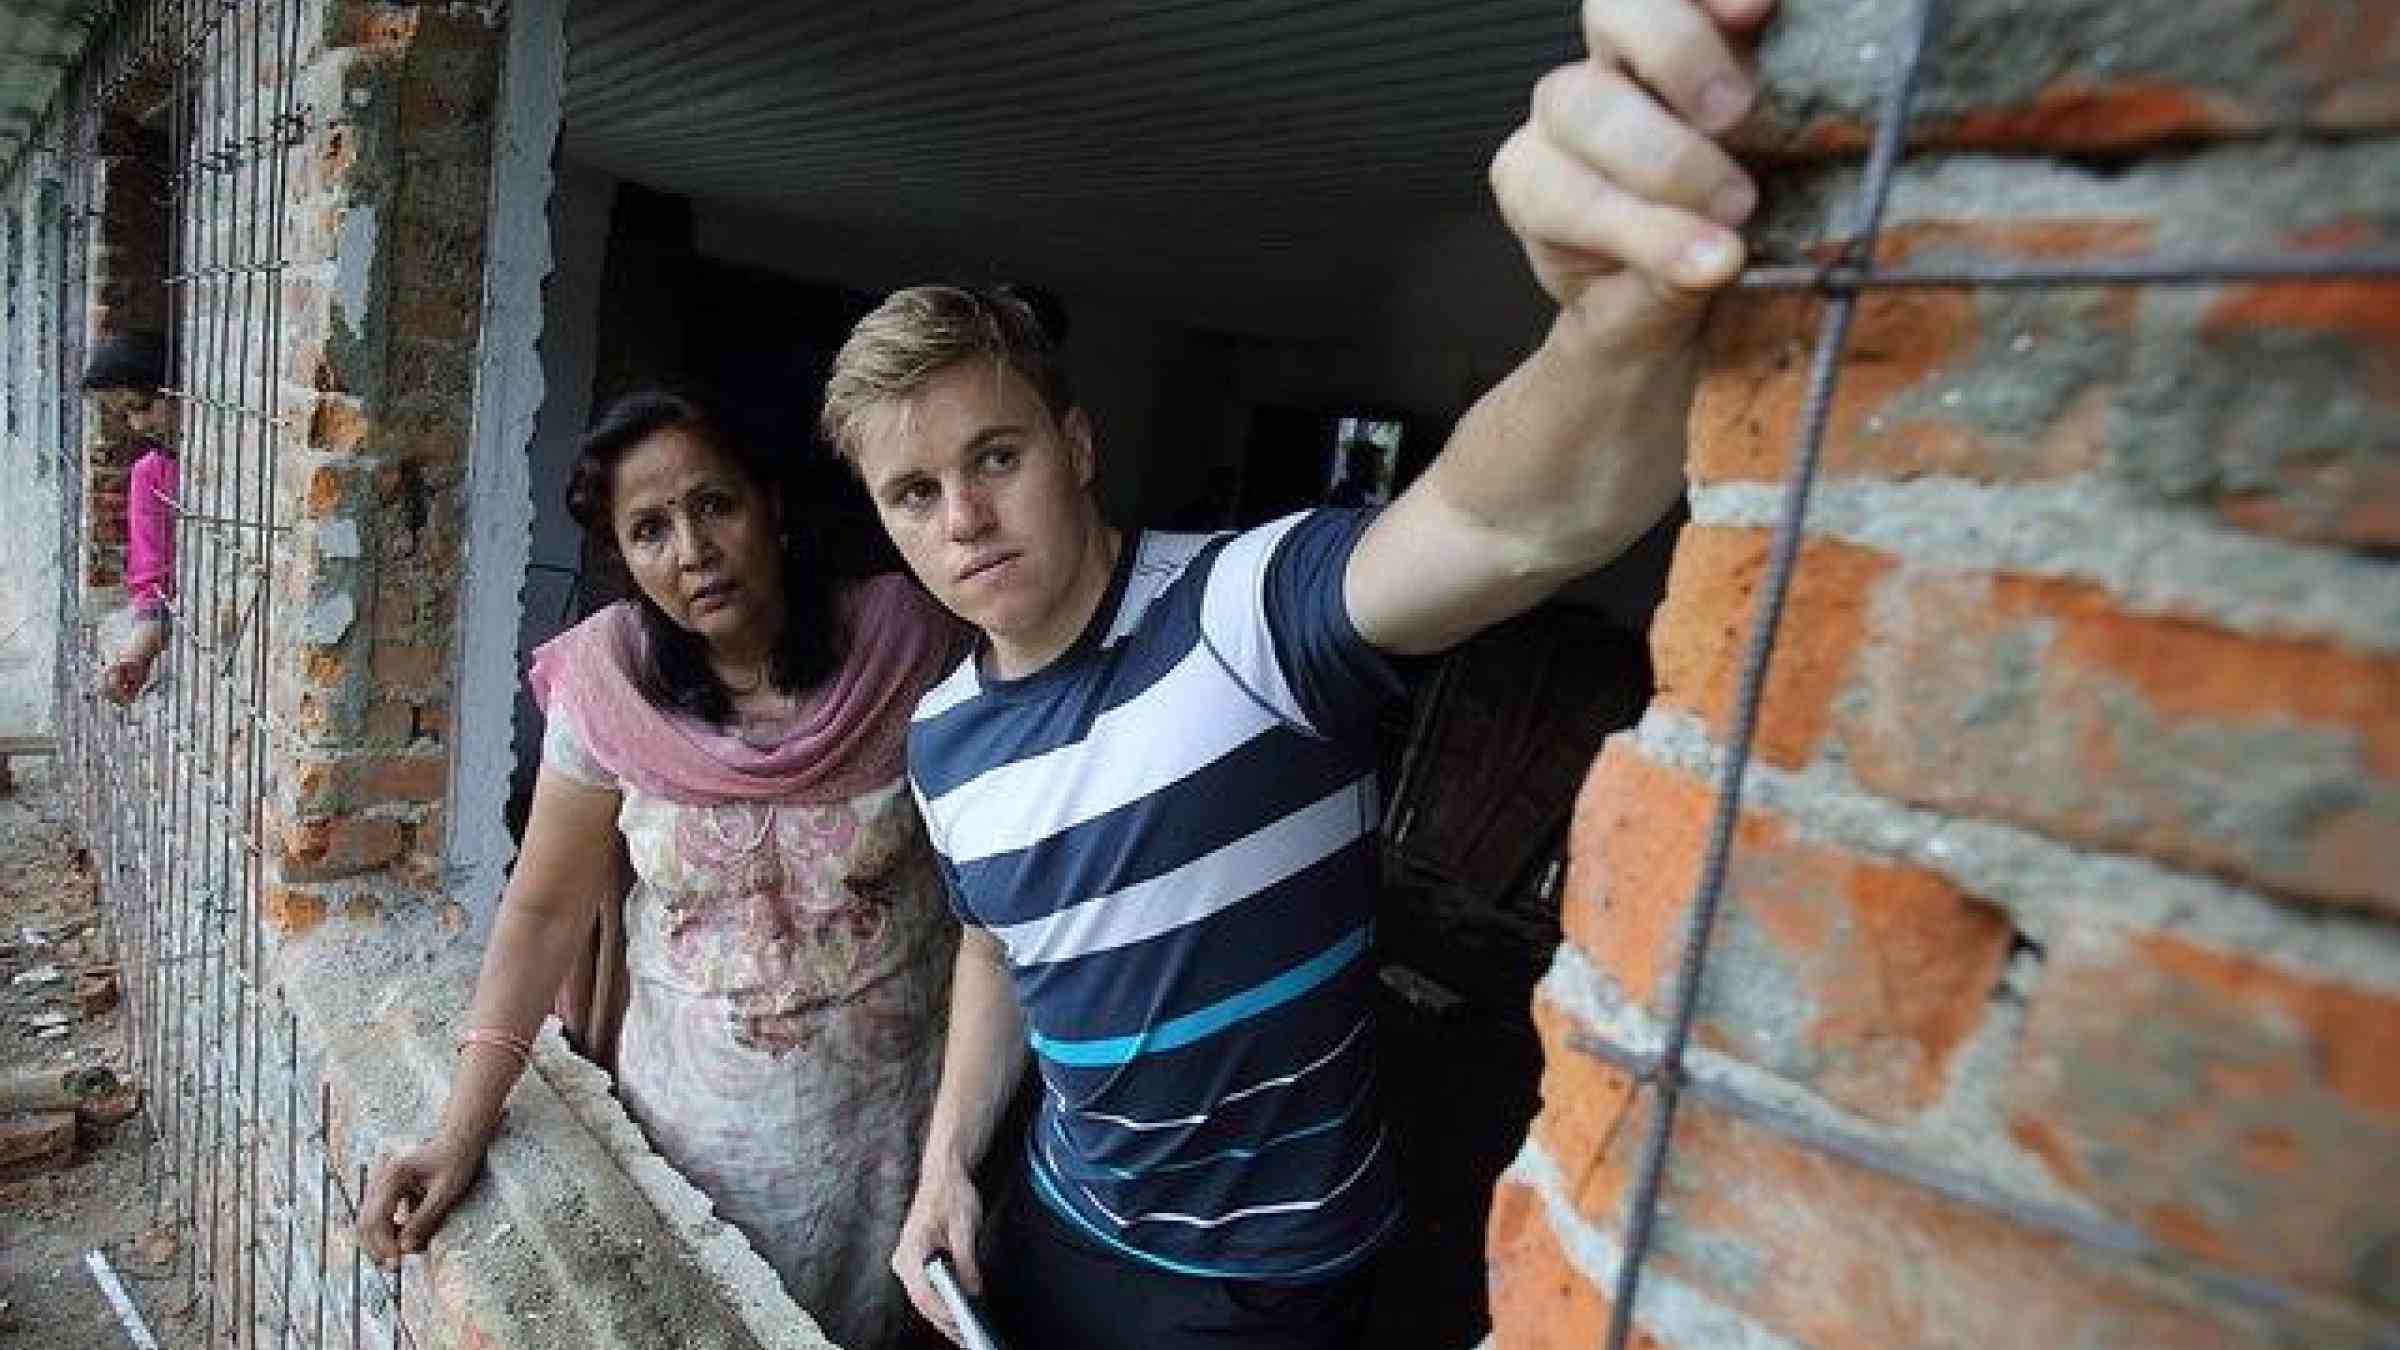 Bryce Harris, an AVID works with NSET seen here with Ms. Bhubaneswari Parajuli, an Australian Alumni, is the Gender, Social and Environmental Management Specialist at the National Society for Earthquake Technology Nepal (NSET). They are inspecting the reconstruction of a school building, in an effort to make it more earthquake proof Kathmandu, Nepal. Photo by Jim Holmes for AusAID. (13/2529), CC BY 2.0, https://www.flickr.com/photos/dfataustralianaid/10678260604